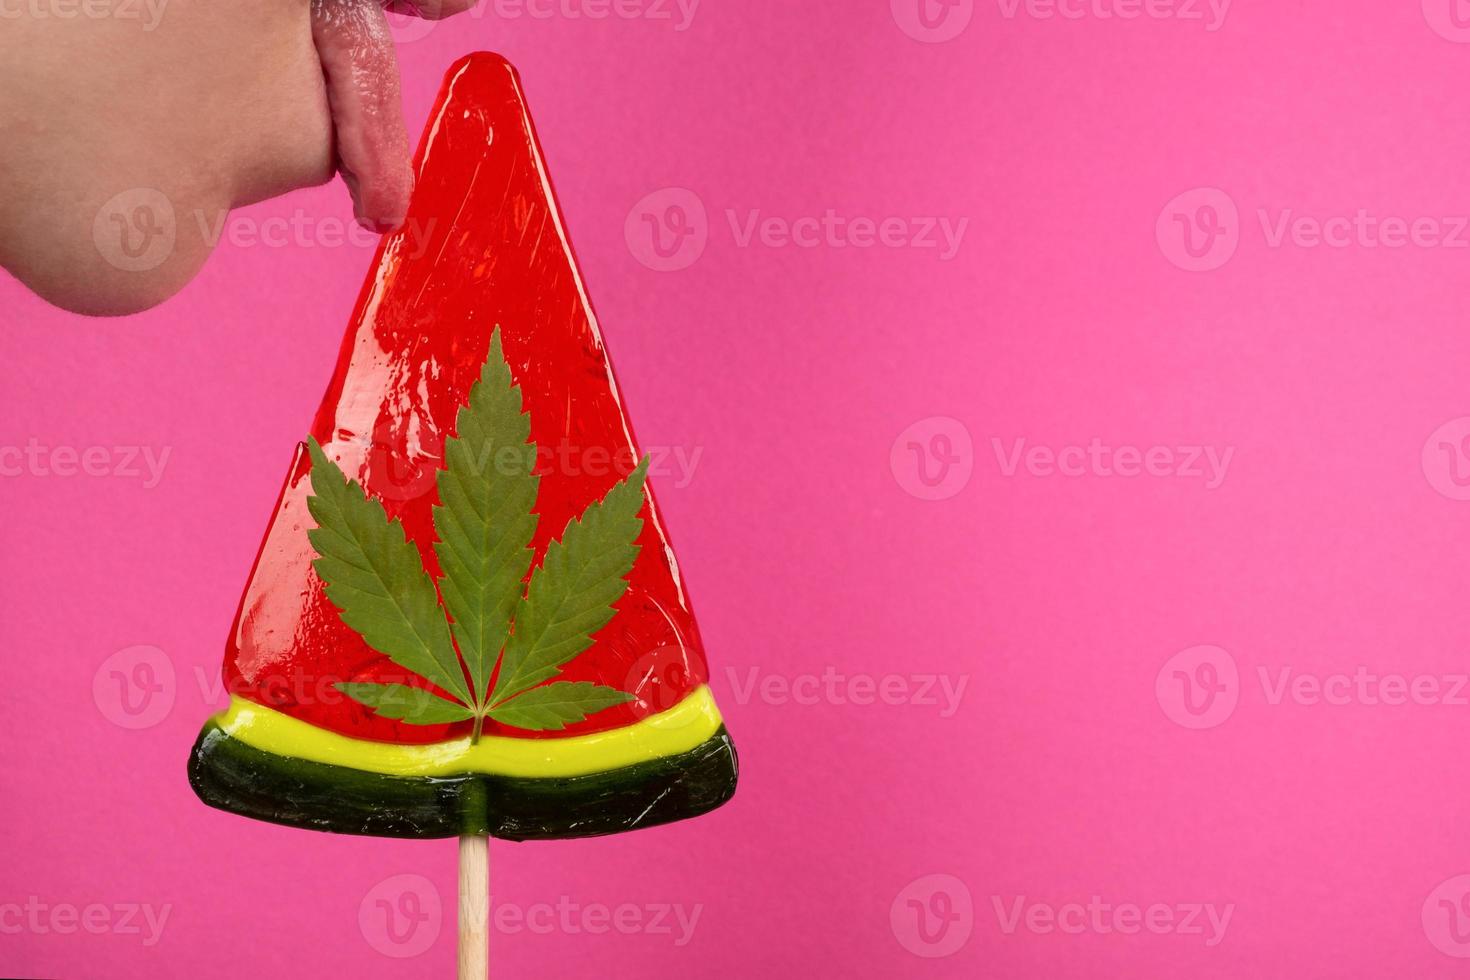 girl licking watermelon lollipop with cannabis copy space, recreational use of marijuana in food photo